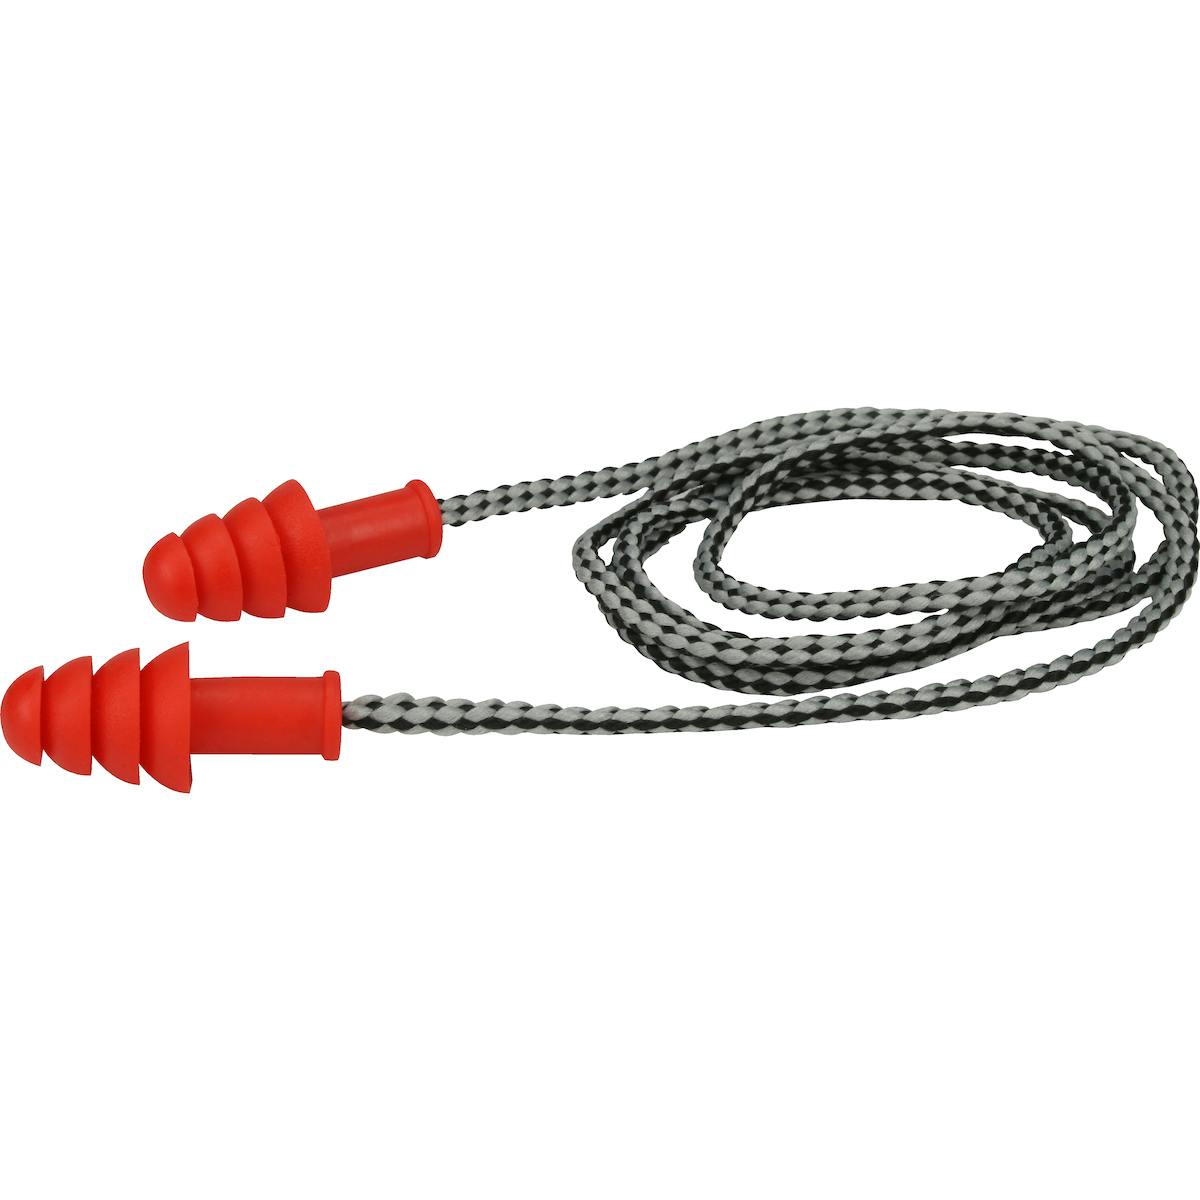 Reusable TPR Corded Ear Plugs - NRR 27, Red (267-HPR410C) - OS_0